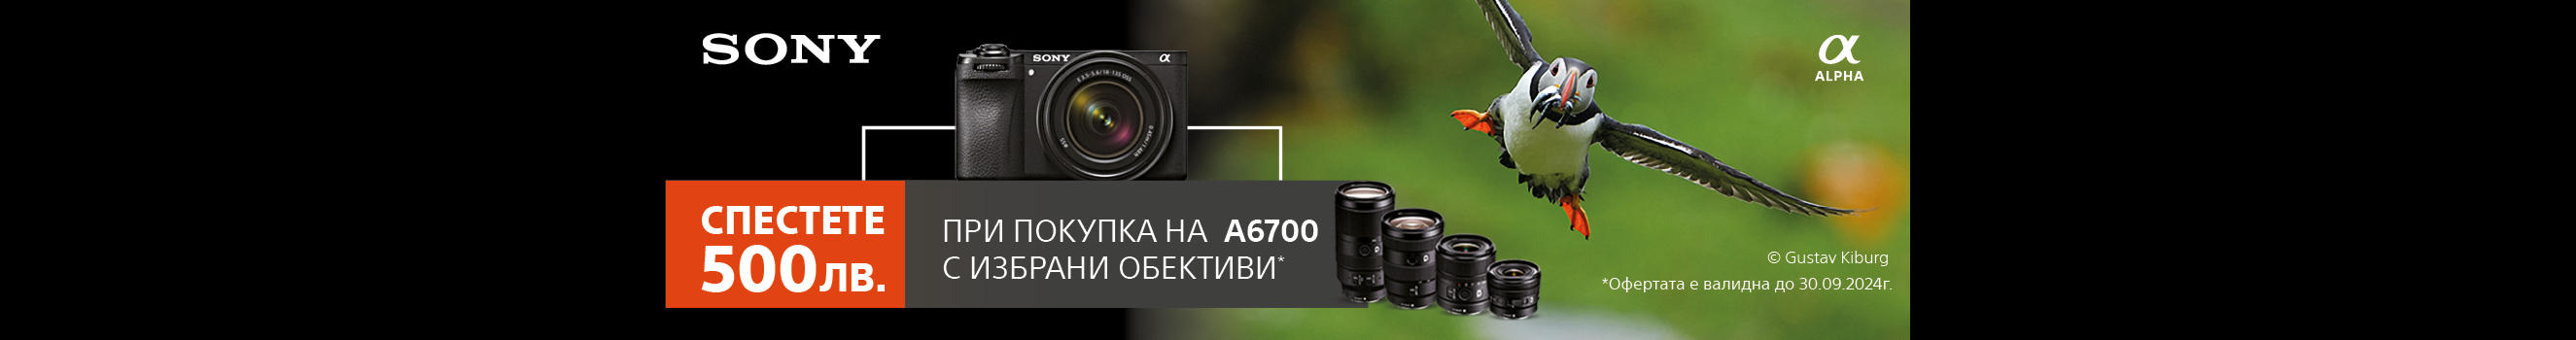  Get selected lenses with a BGN 500 discount each when purchased together with a Sony A6700 camera until 30.09